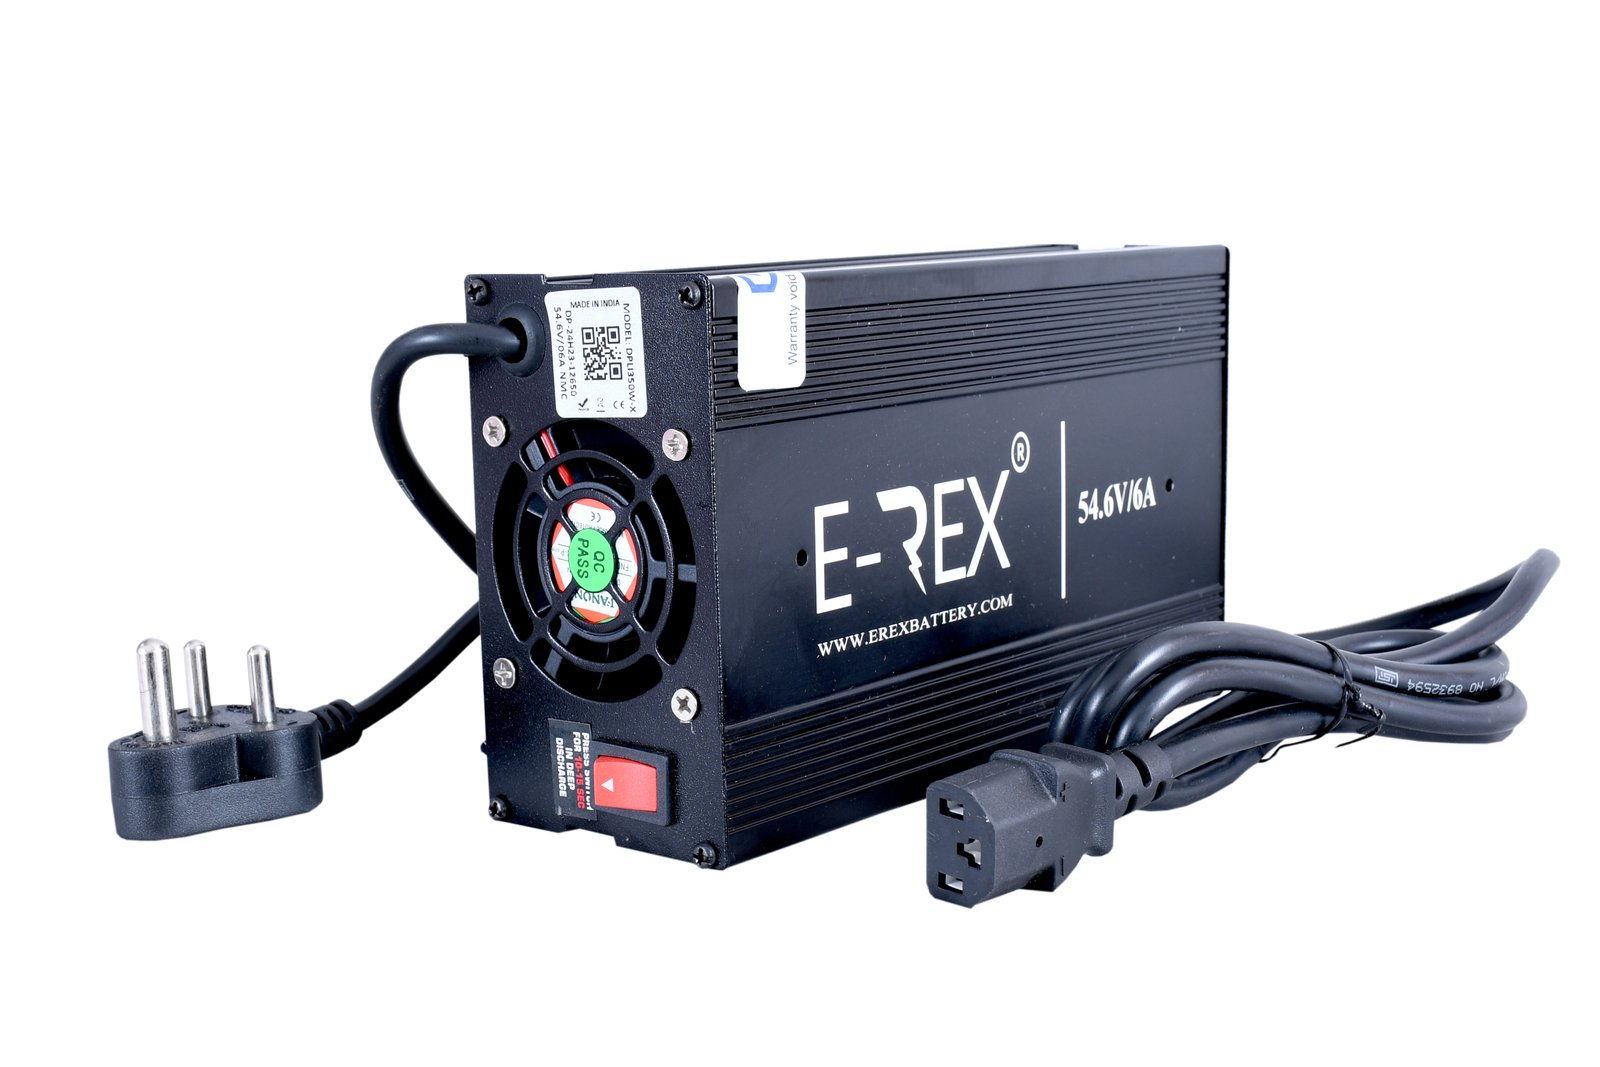 E-Rex 54.6V 6A Lithium Battery Charger Metal Body, Supported